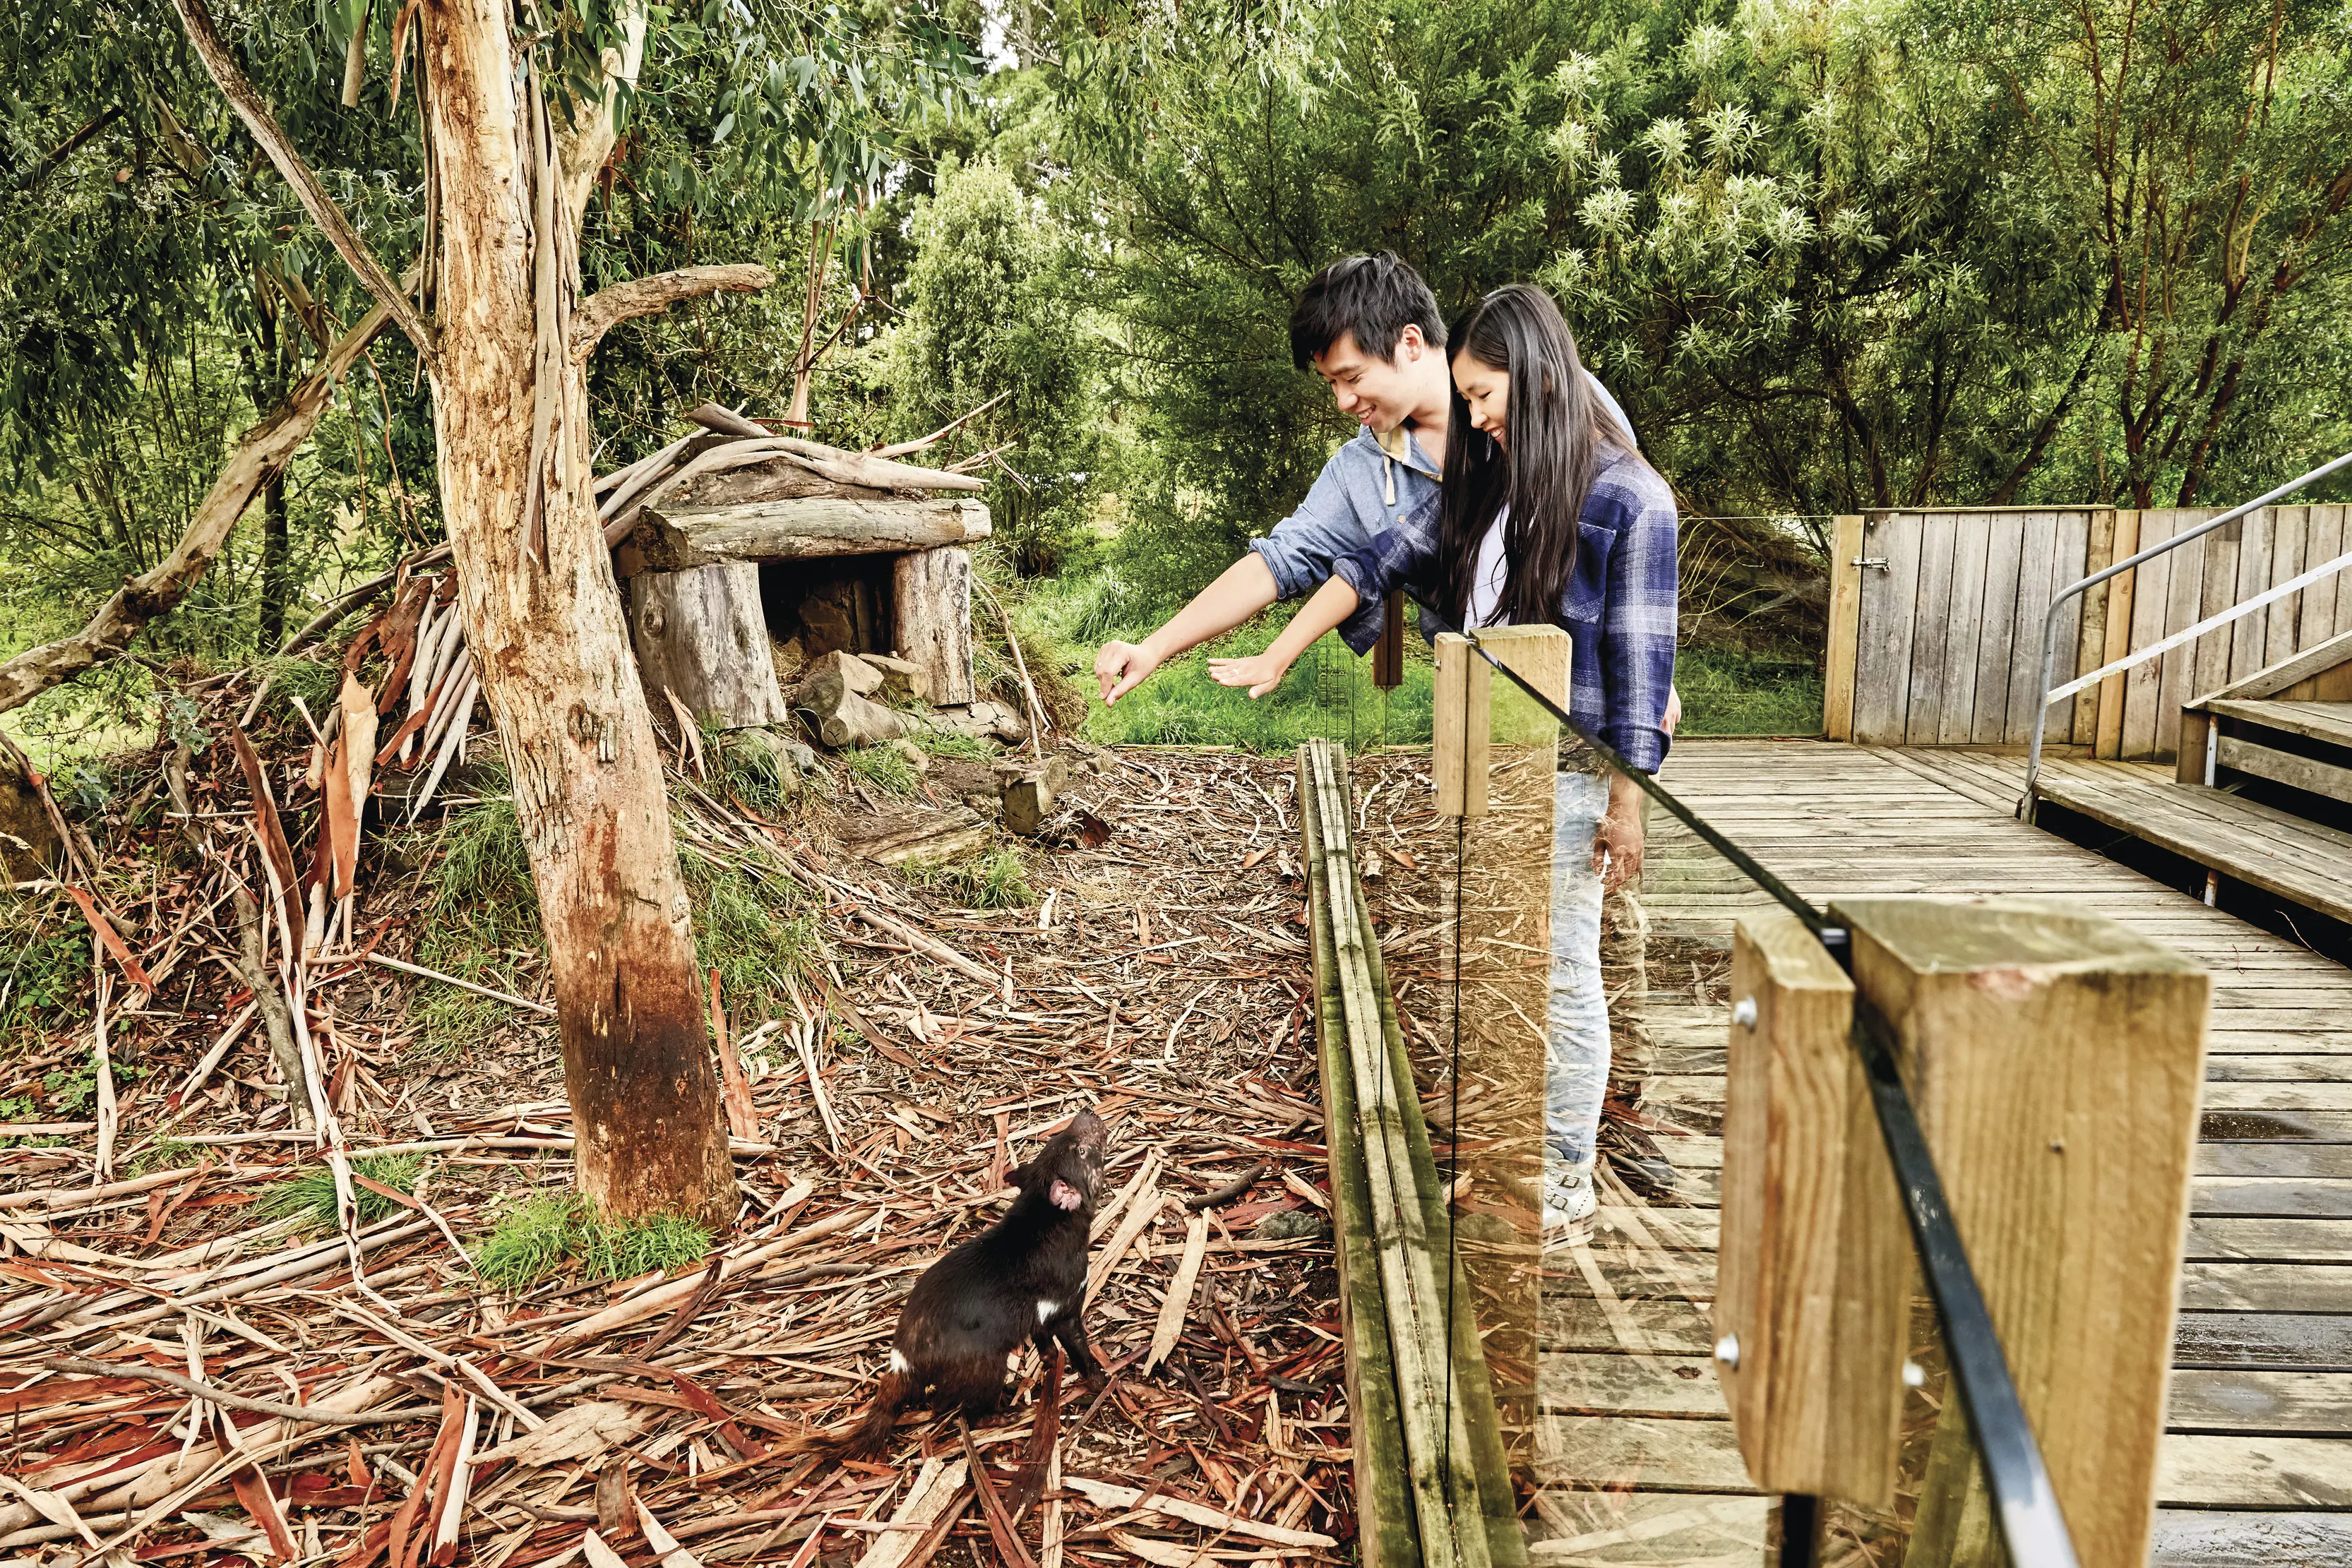 Two people lean over a fence as a Tasmanian devil looks up at them, at Tasmanian Devil Unzoo.